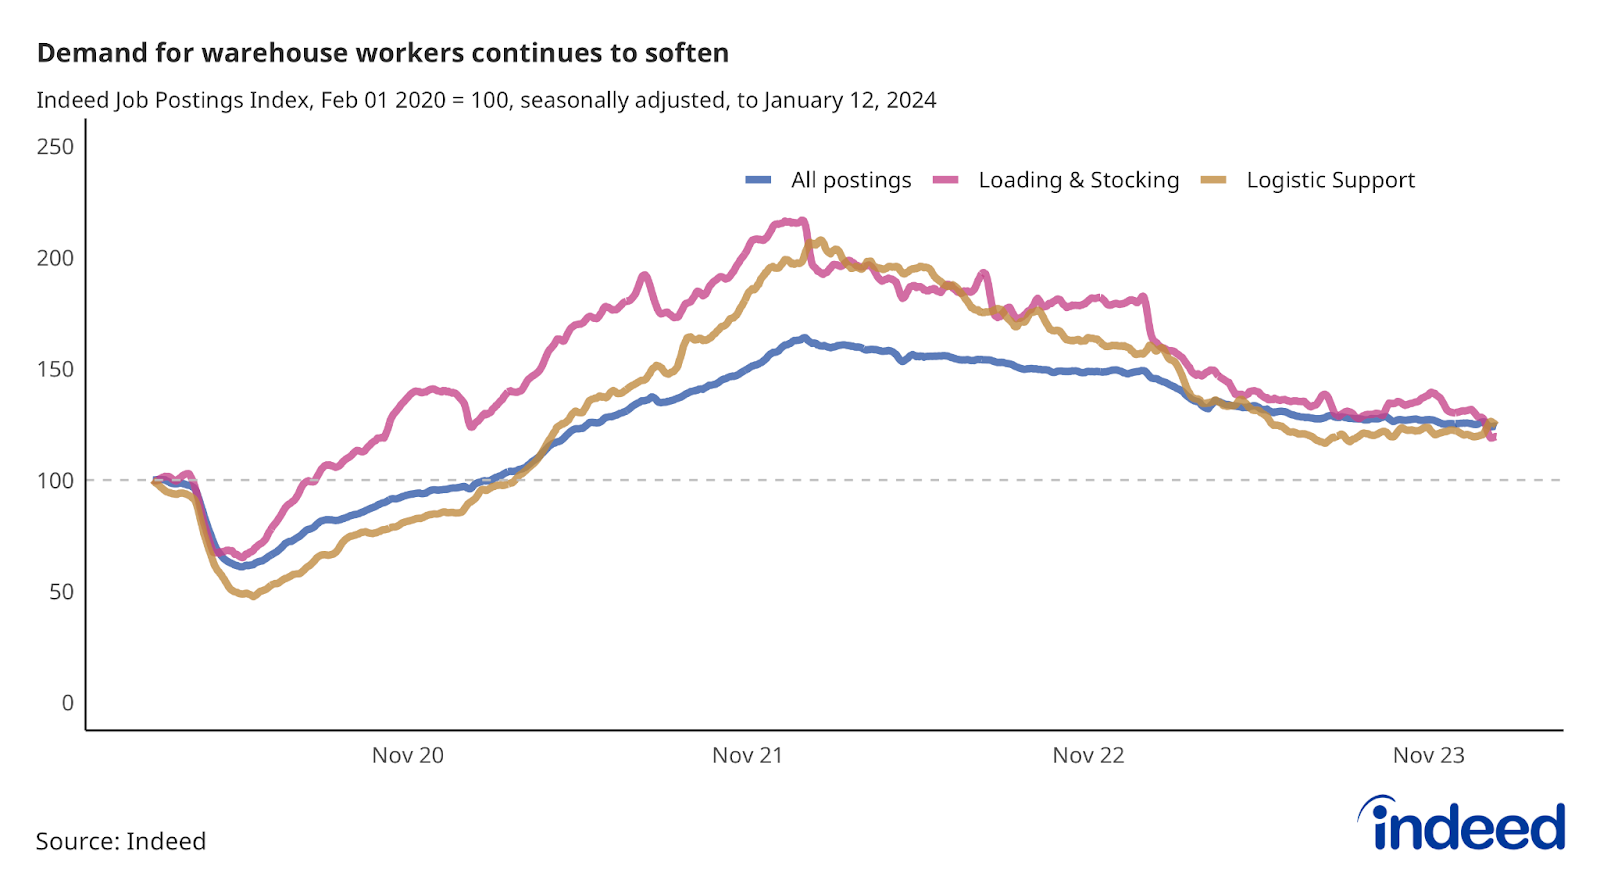 Line chart titled “Demand for warehouse workers continues to soften,” shows job postings in Loading & Stocking and Logistic Support to Jan. 12, 2024. Both of these segments have lost job postings over the past year.